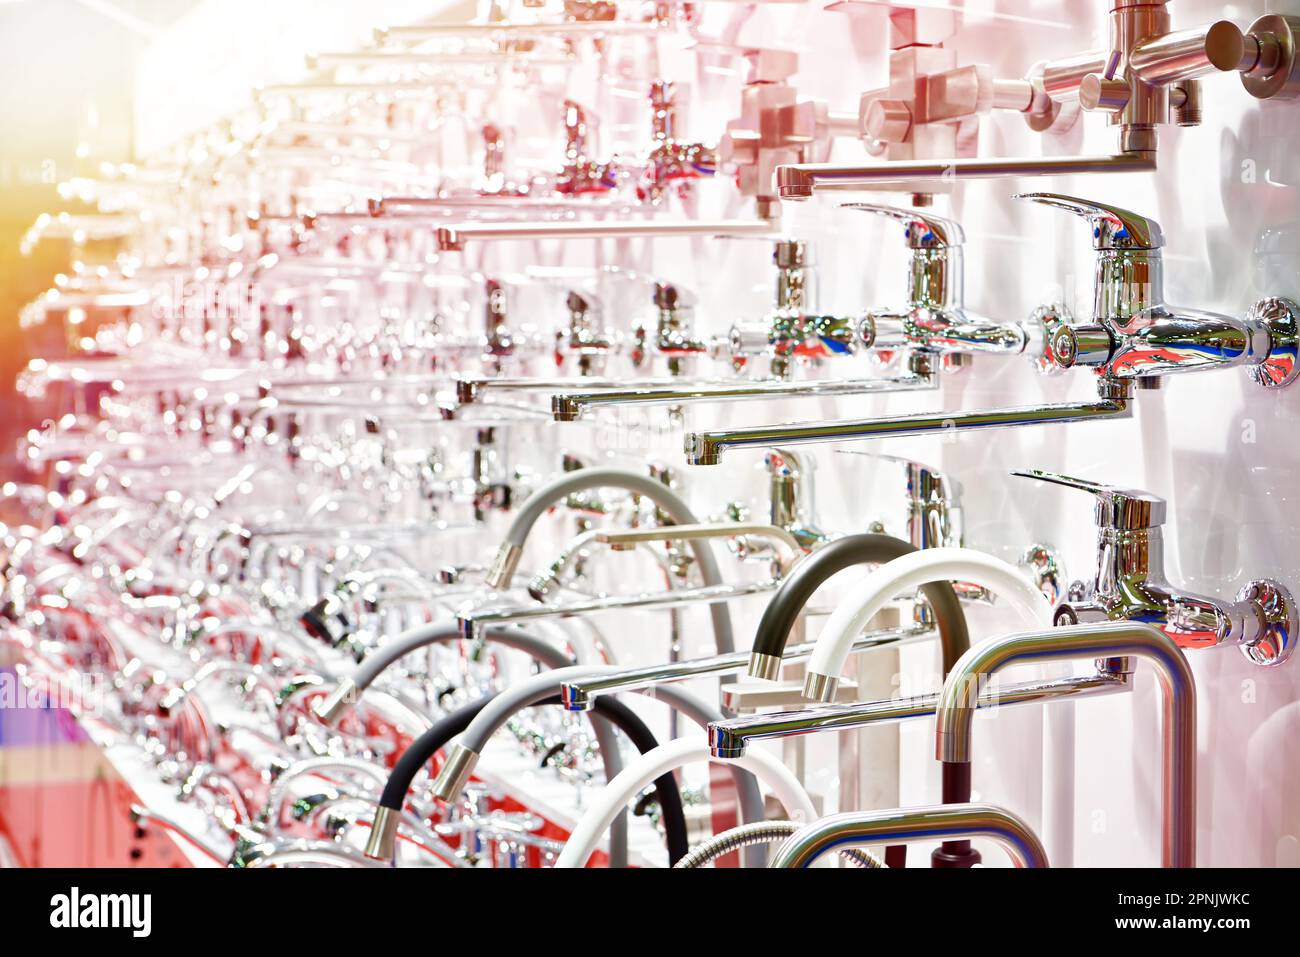 Water faucets in hardware store Stock Photo